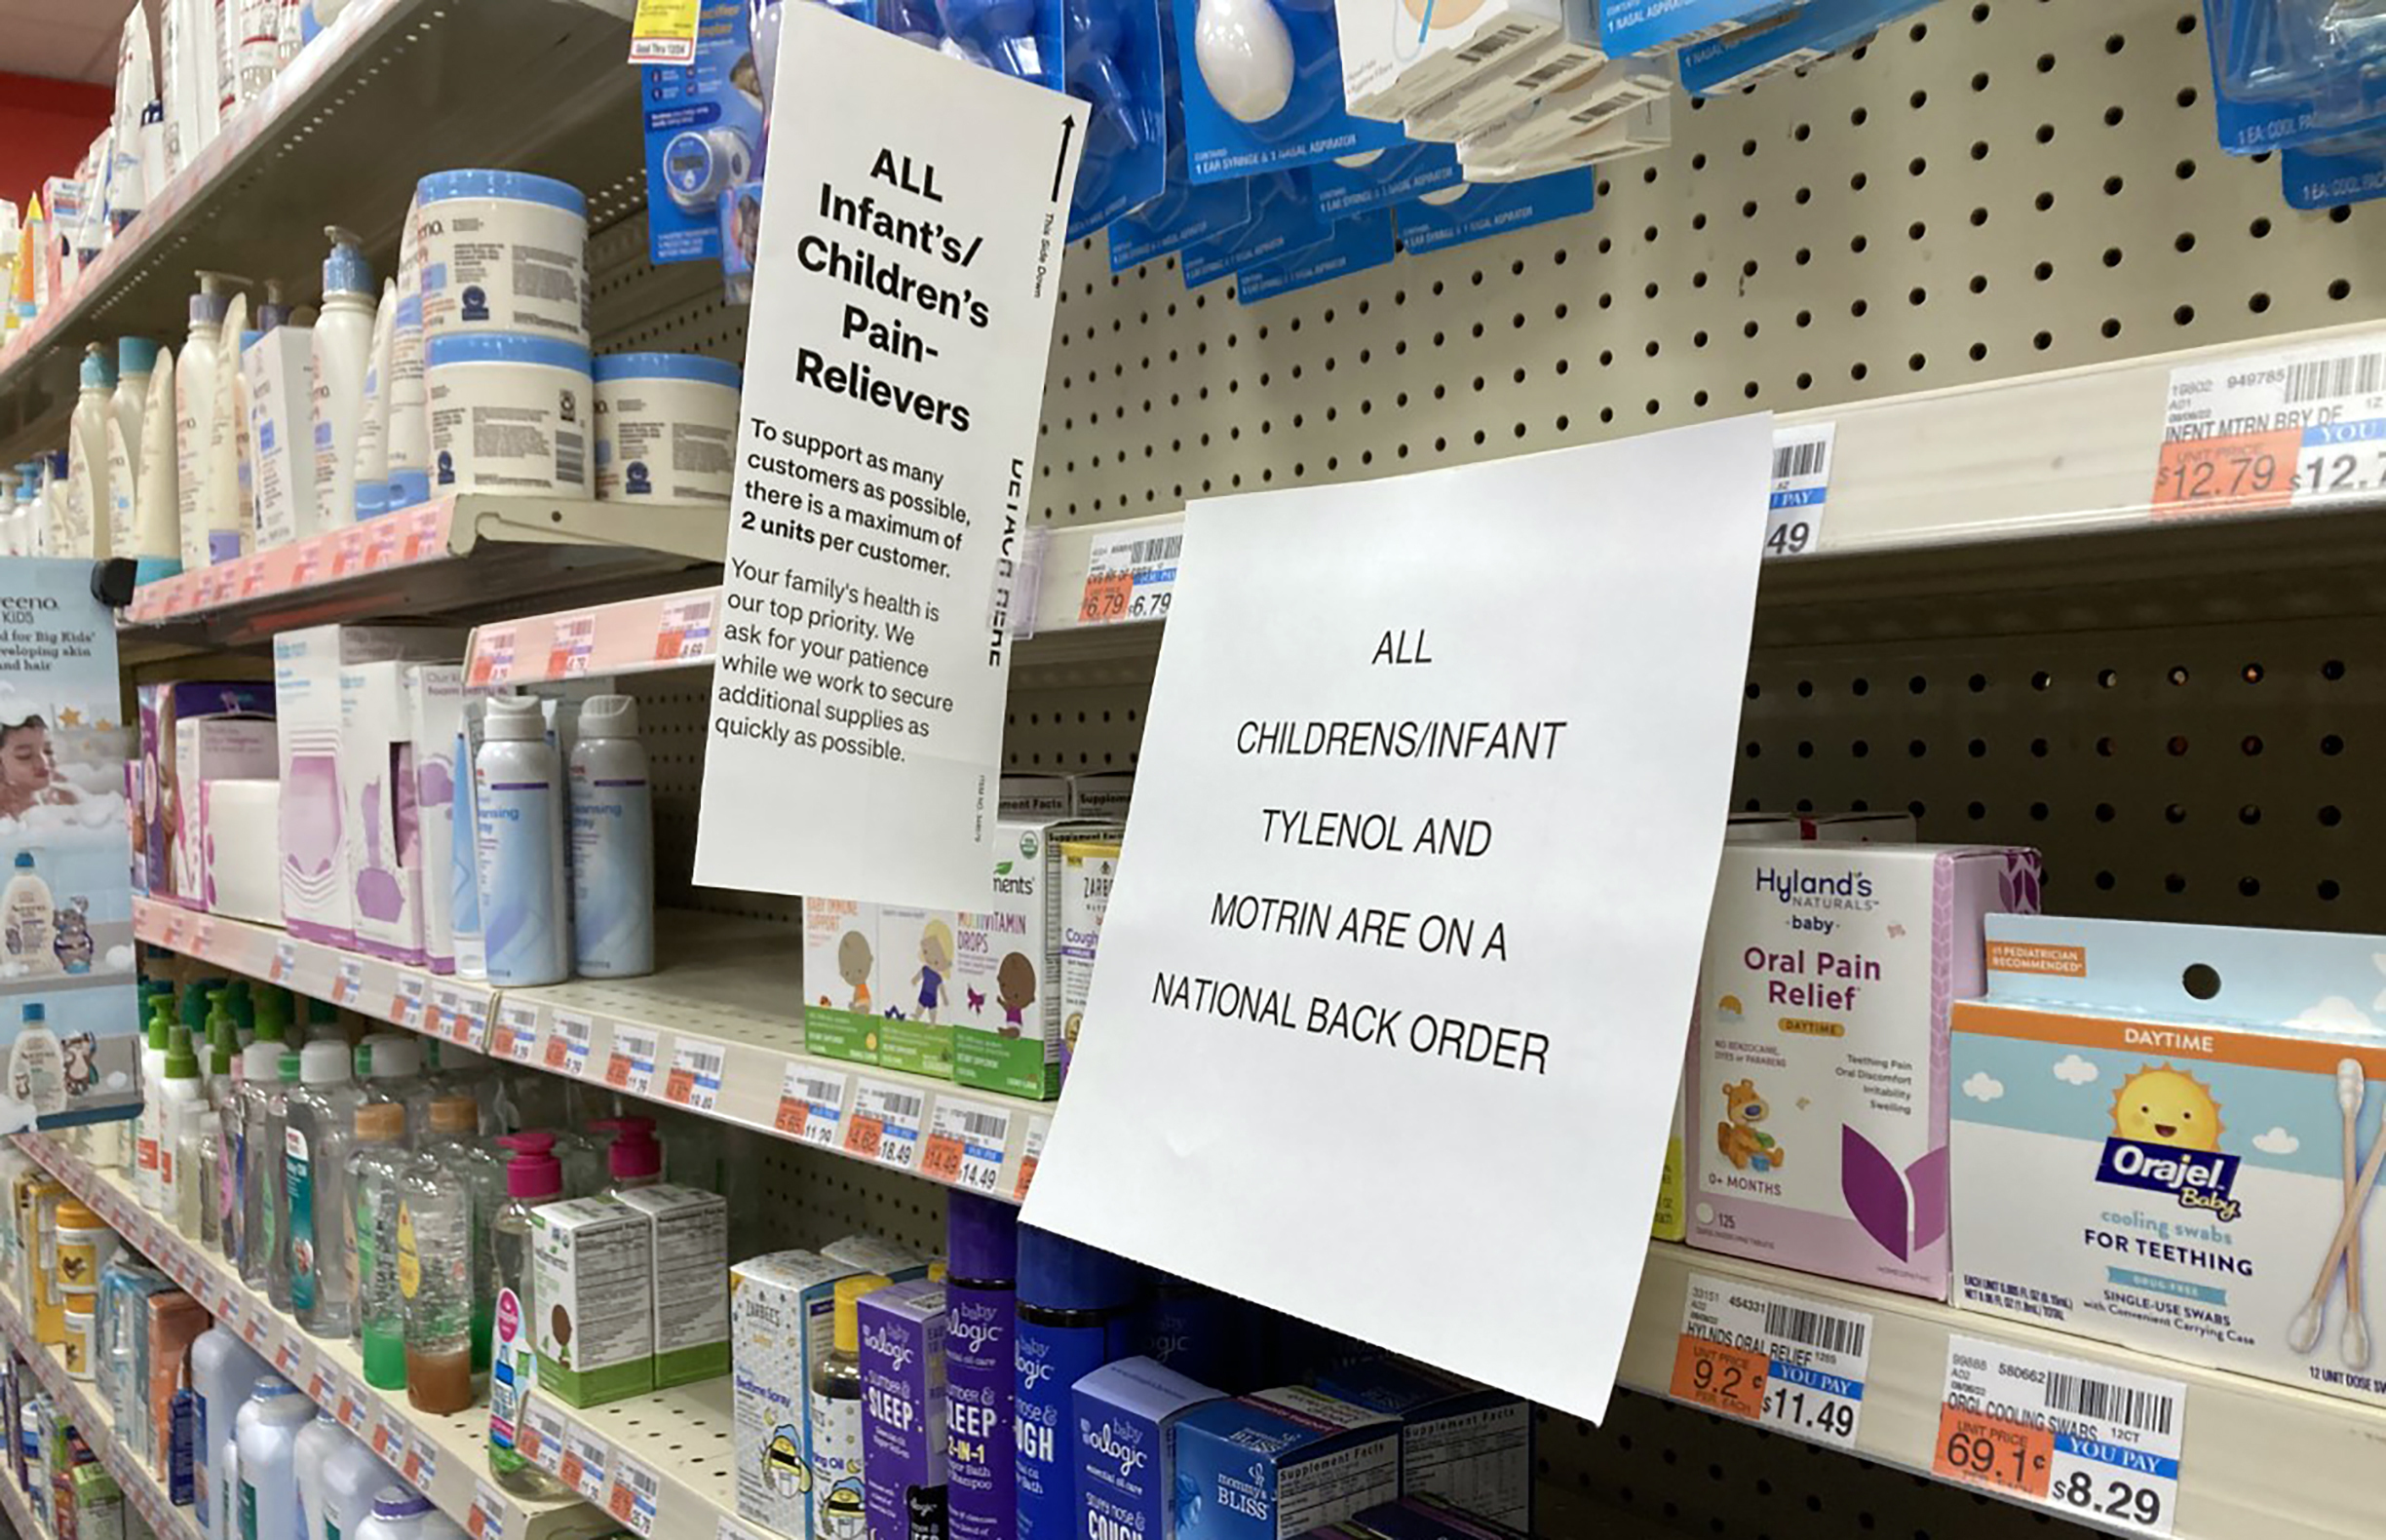 Children's Medicine shortage: Store shelves stocked with childremn's medicine and signs about buying limits and out of stock